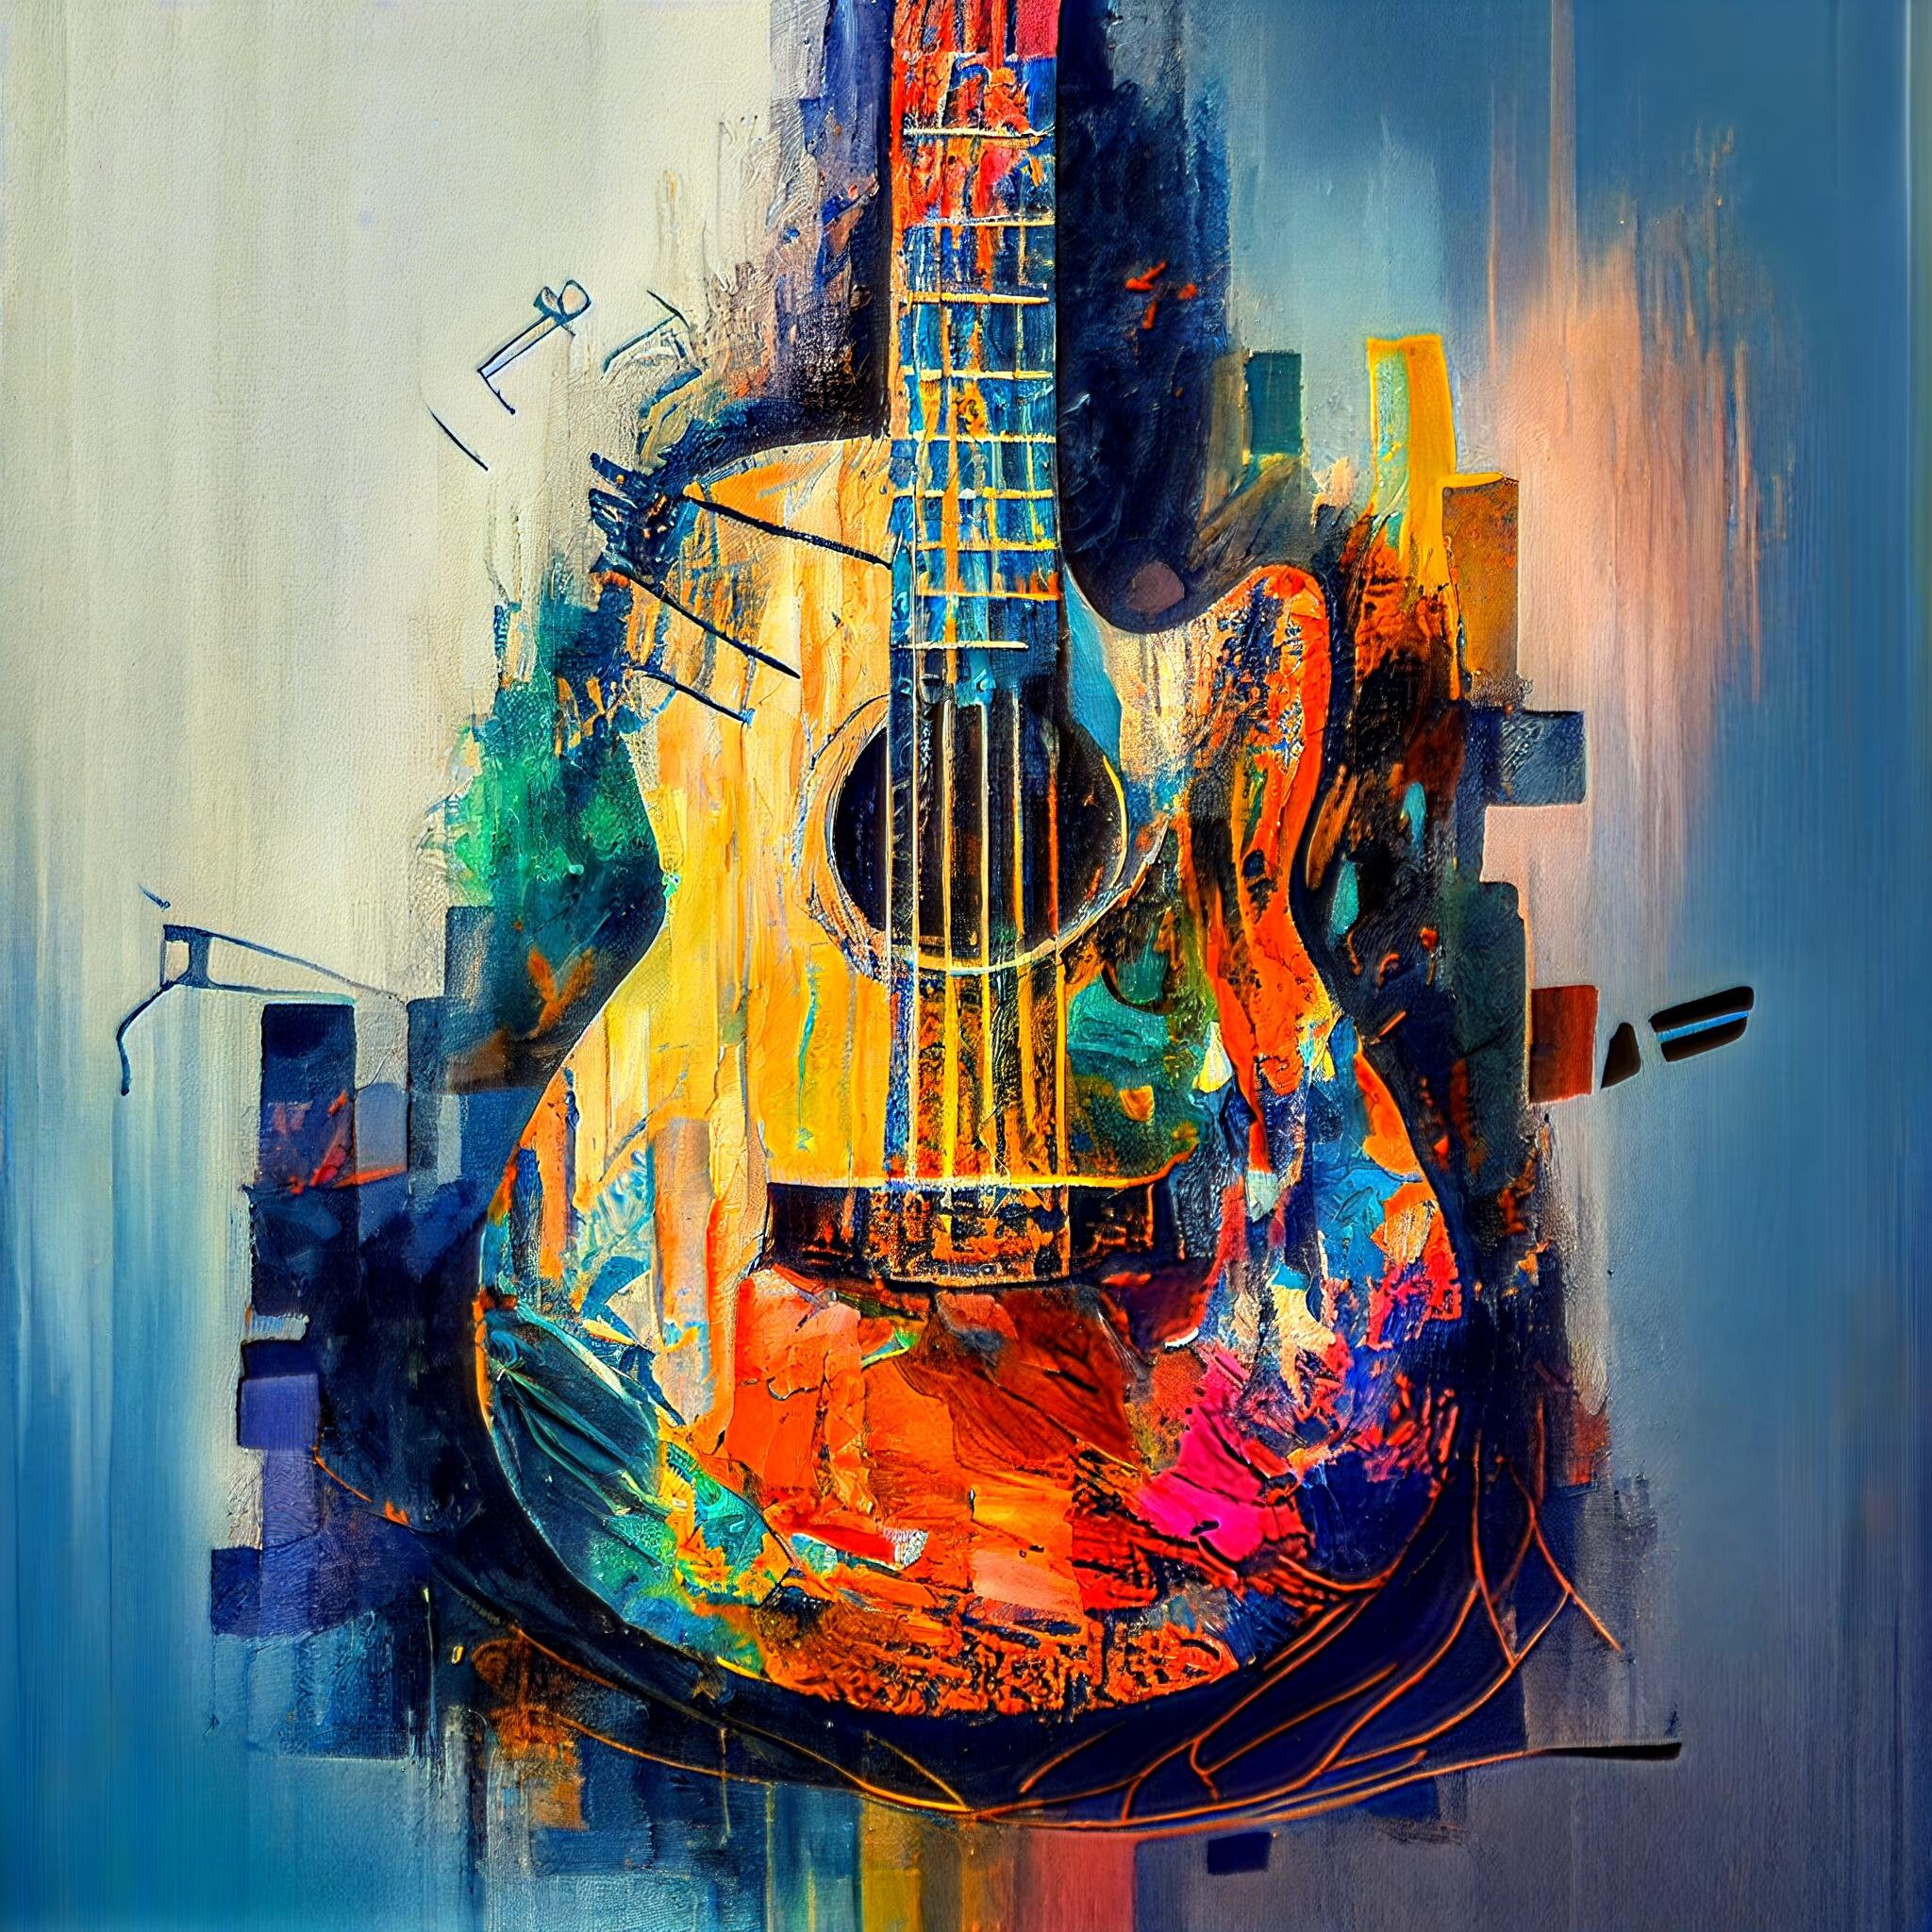 Sold at Auction: Contemporary Electric Guitar Oil Canvas Painting